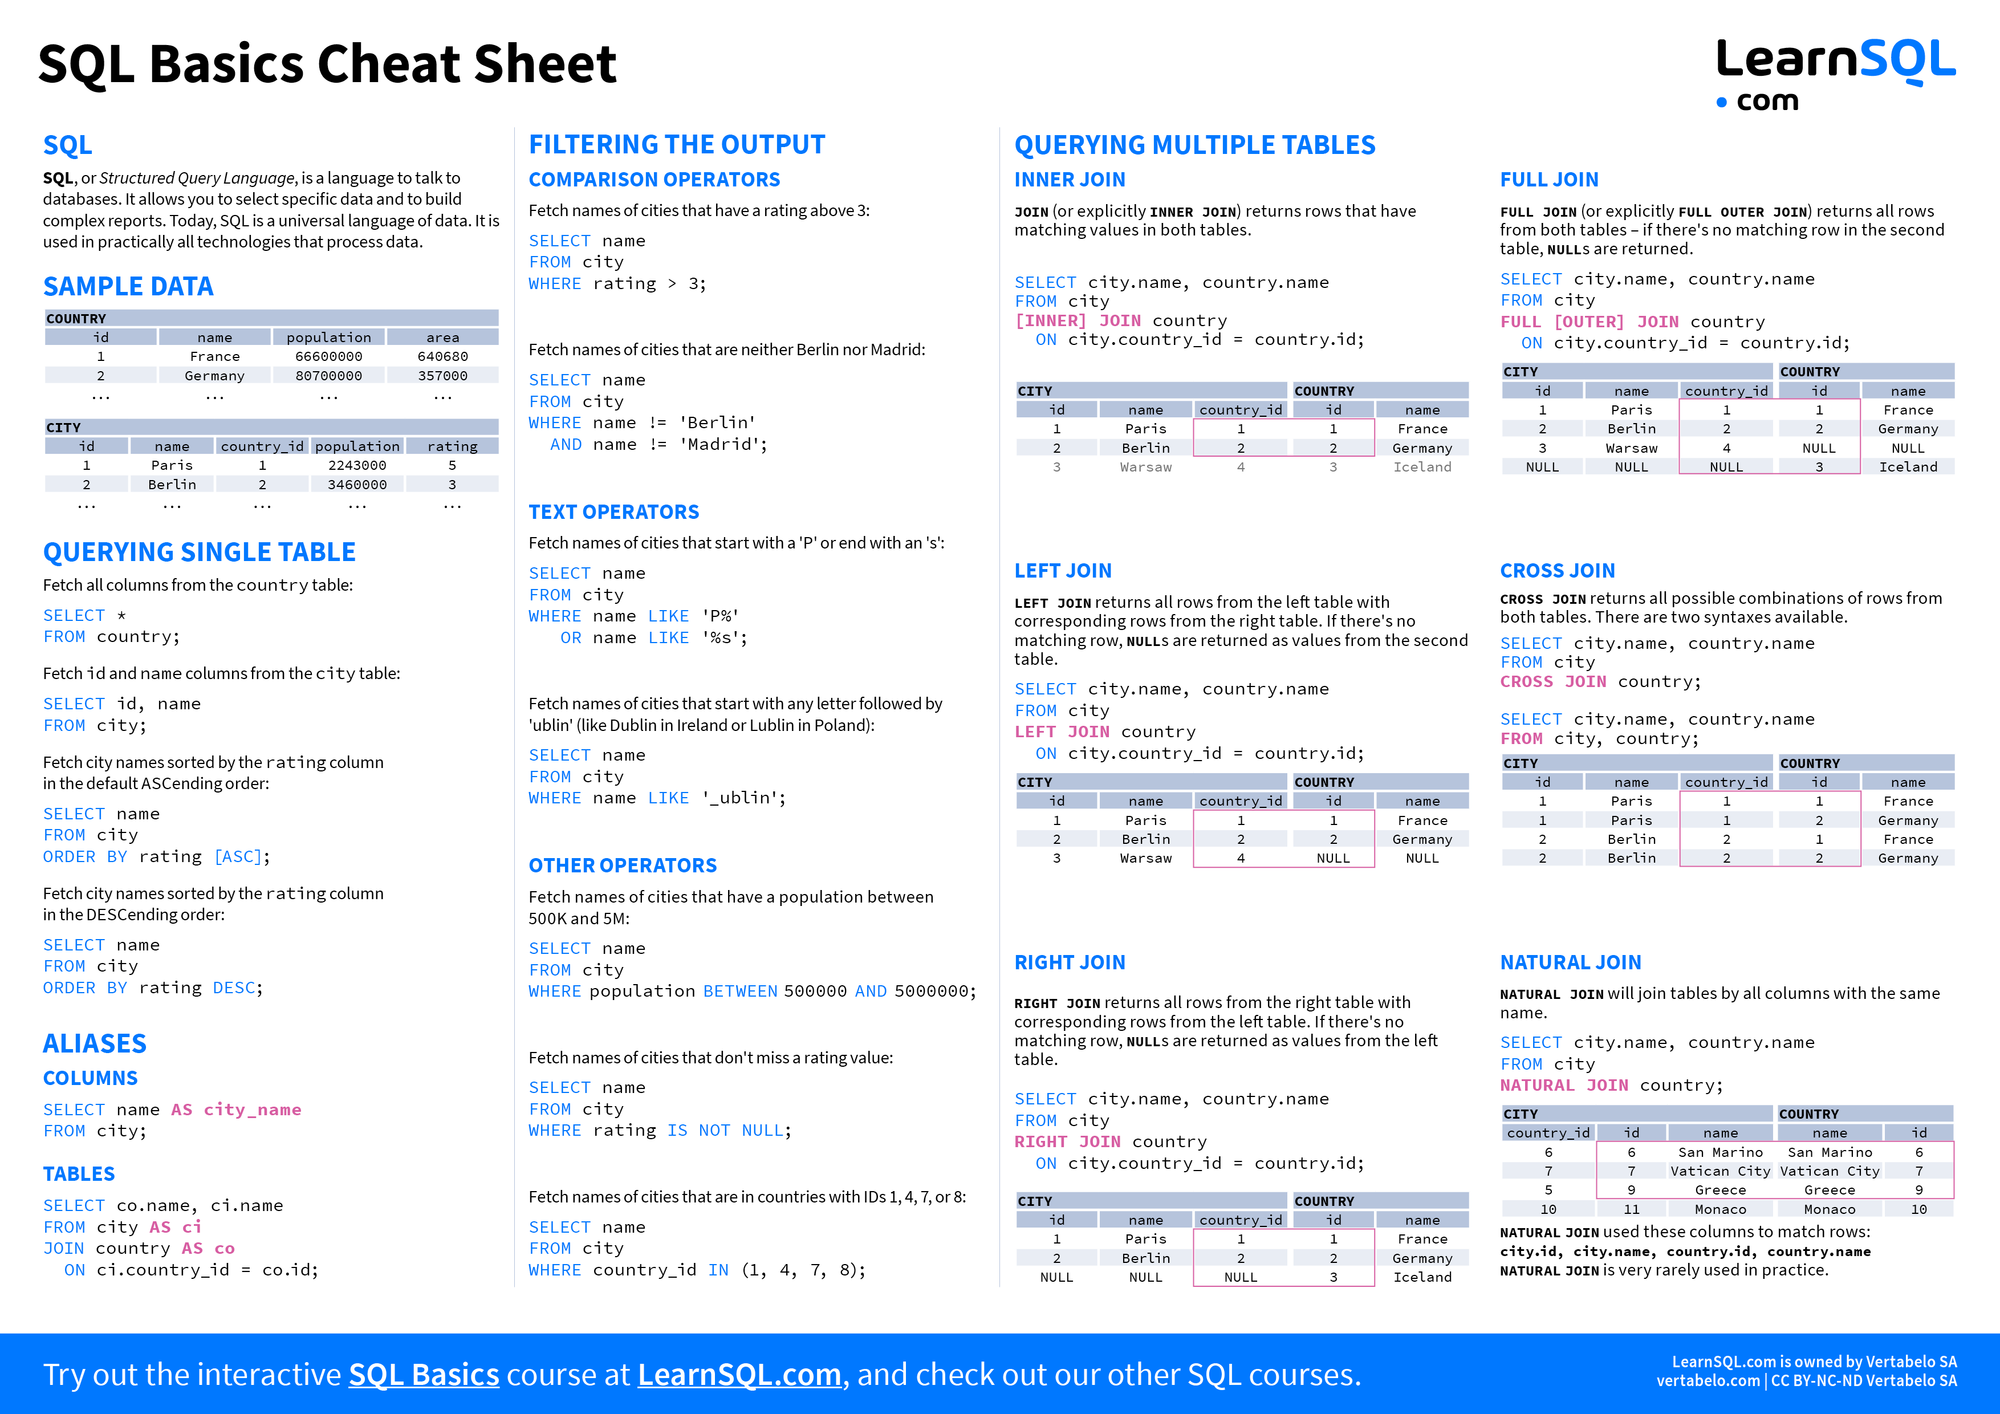 This 2-page SQL Basics Cheat Sheet will be a great value for beginners as w...